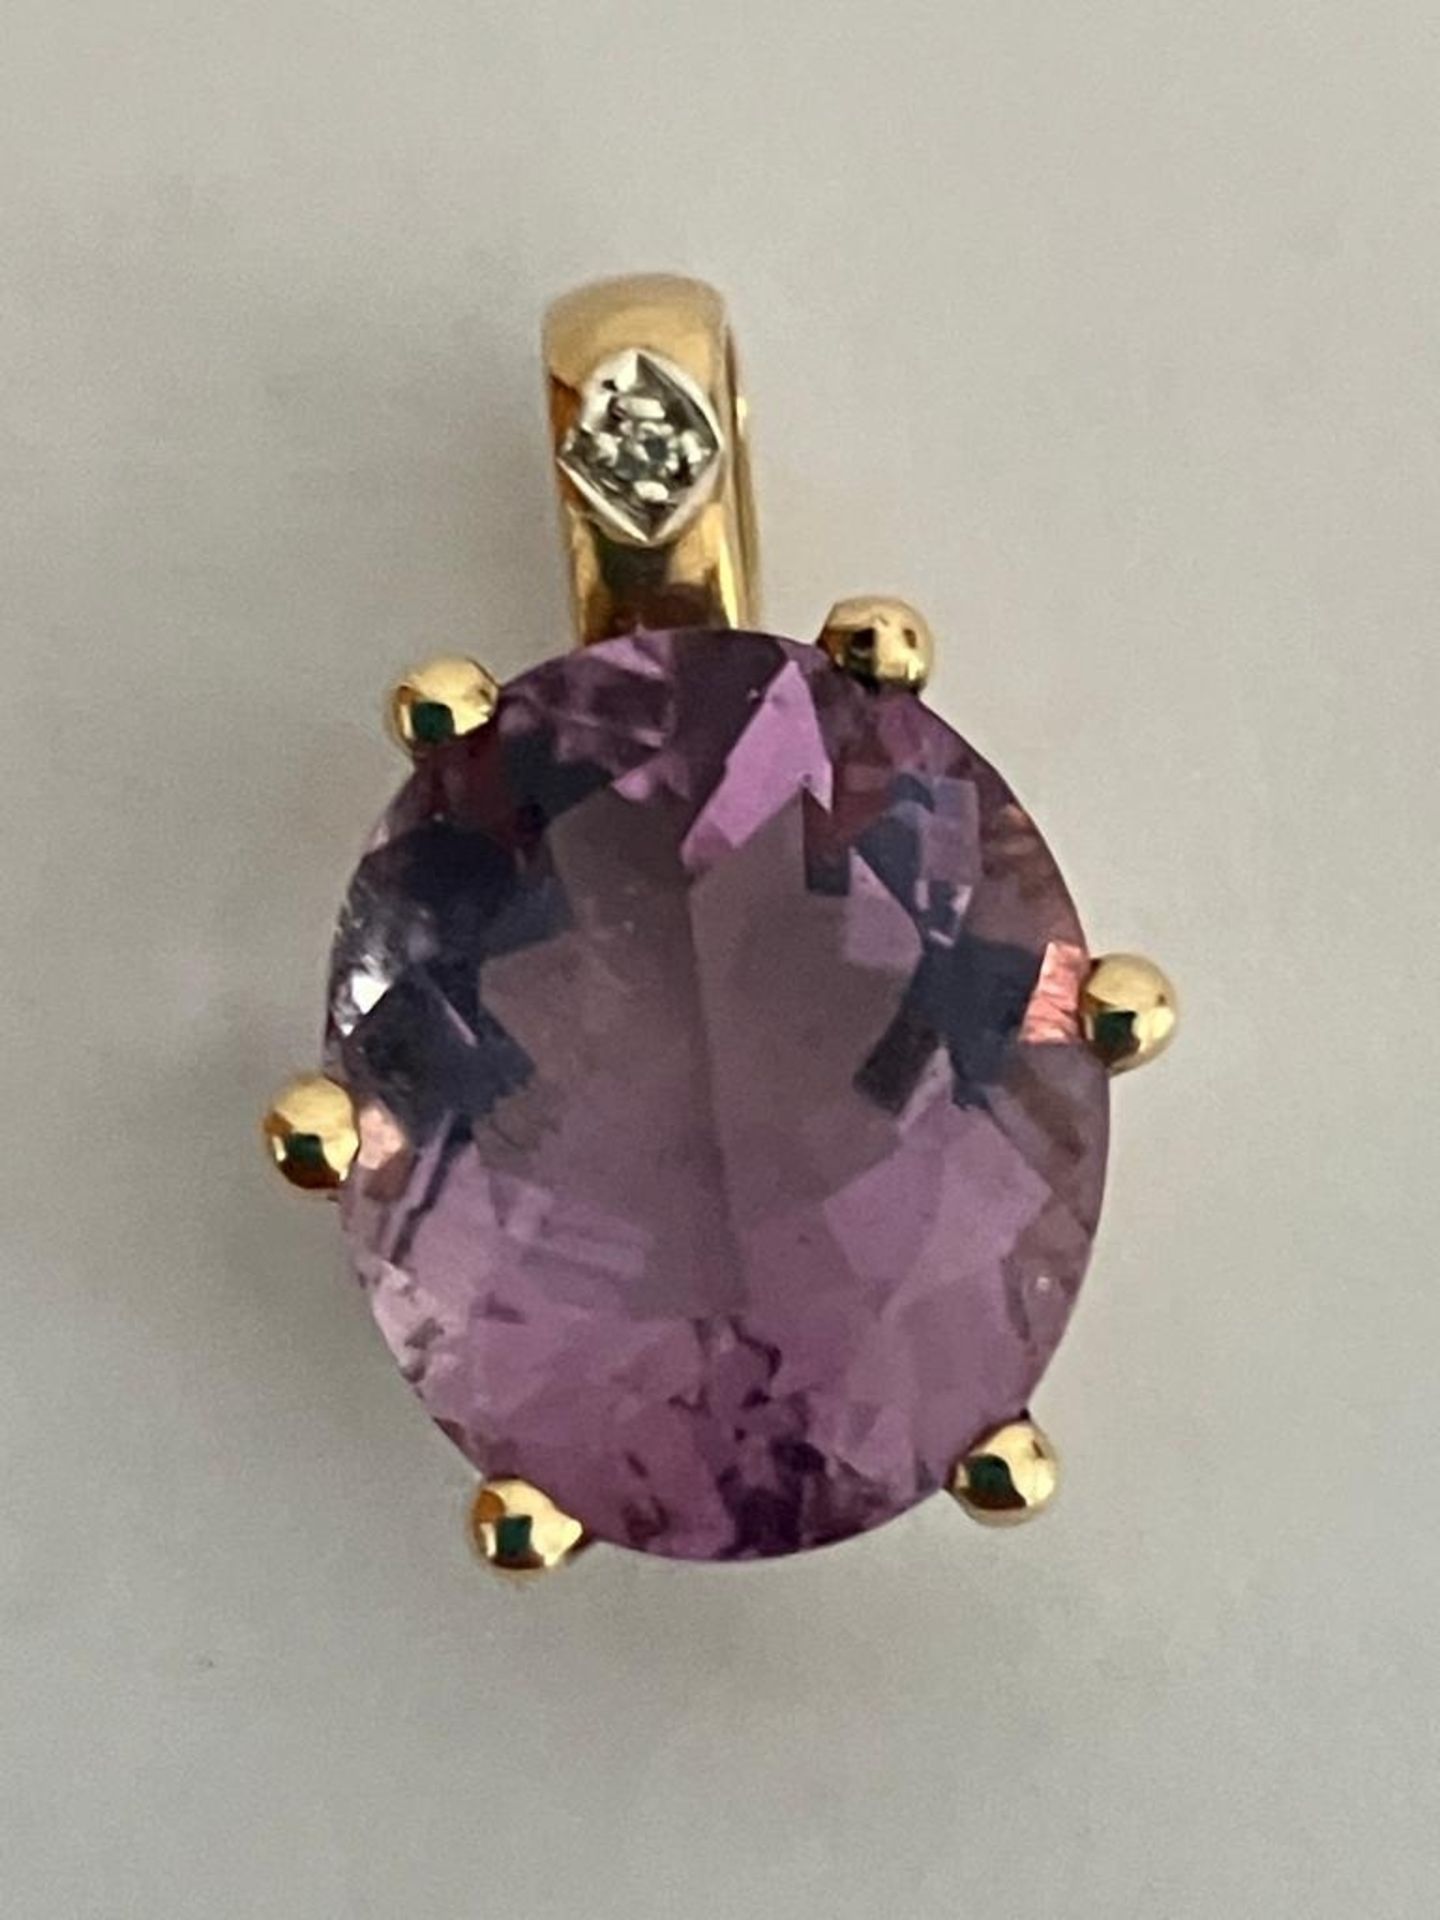 Hallmarked 9 carat YELLOW GOLD PENDANT set with a beautiful Oval Cut 3 carat AMETHYST in